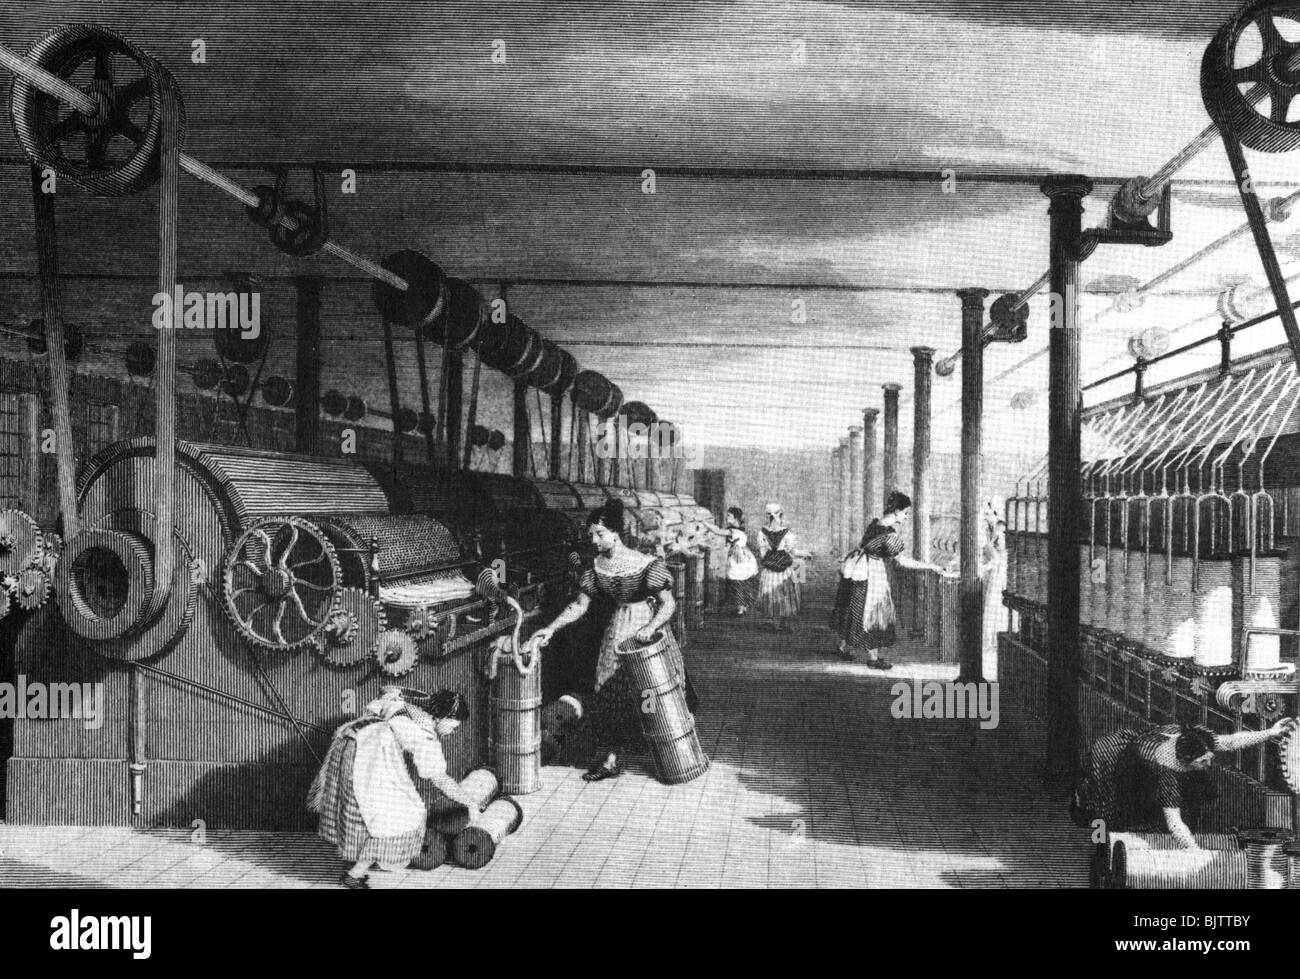 Textile mill 19th century Black and White Stock Photos & Images - Alamy